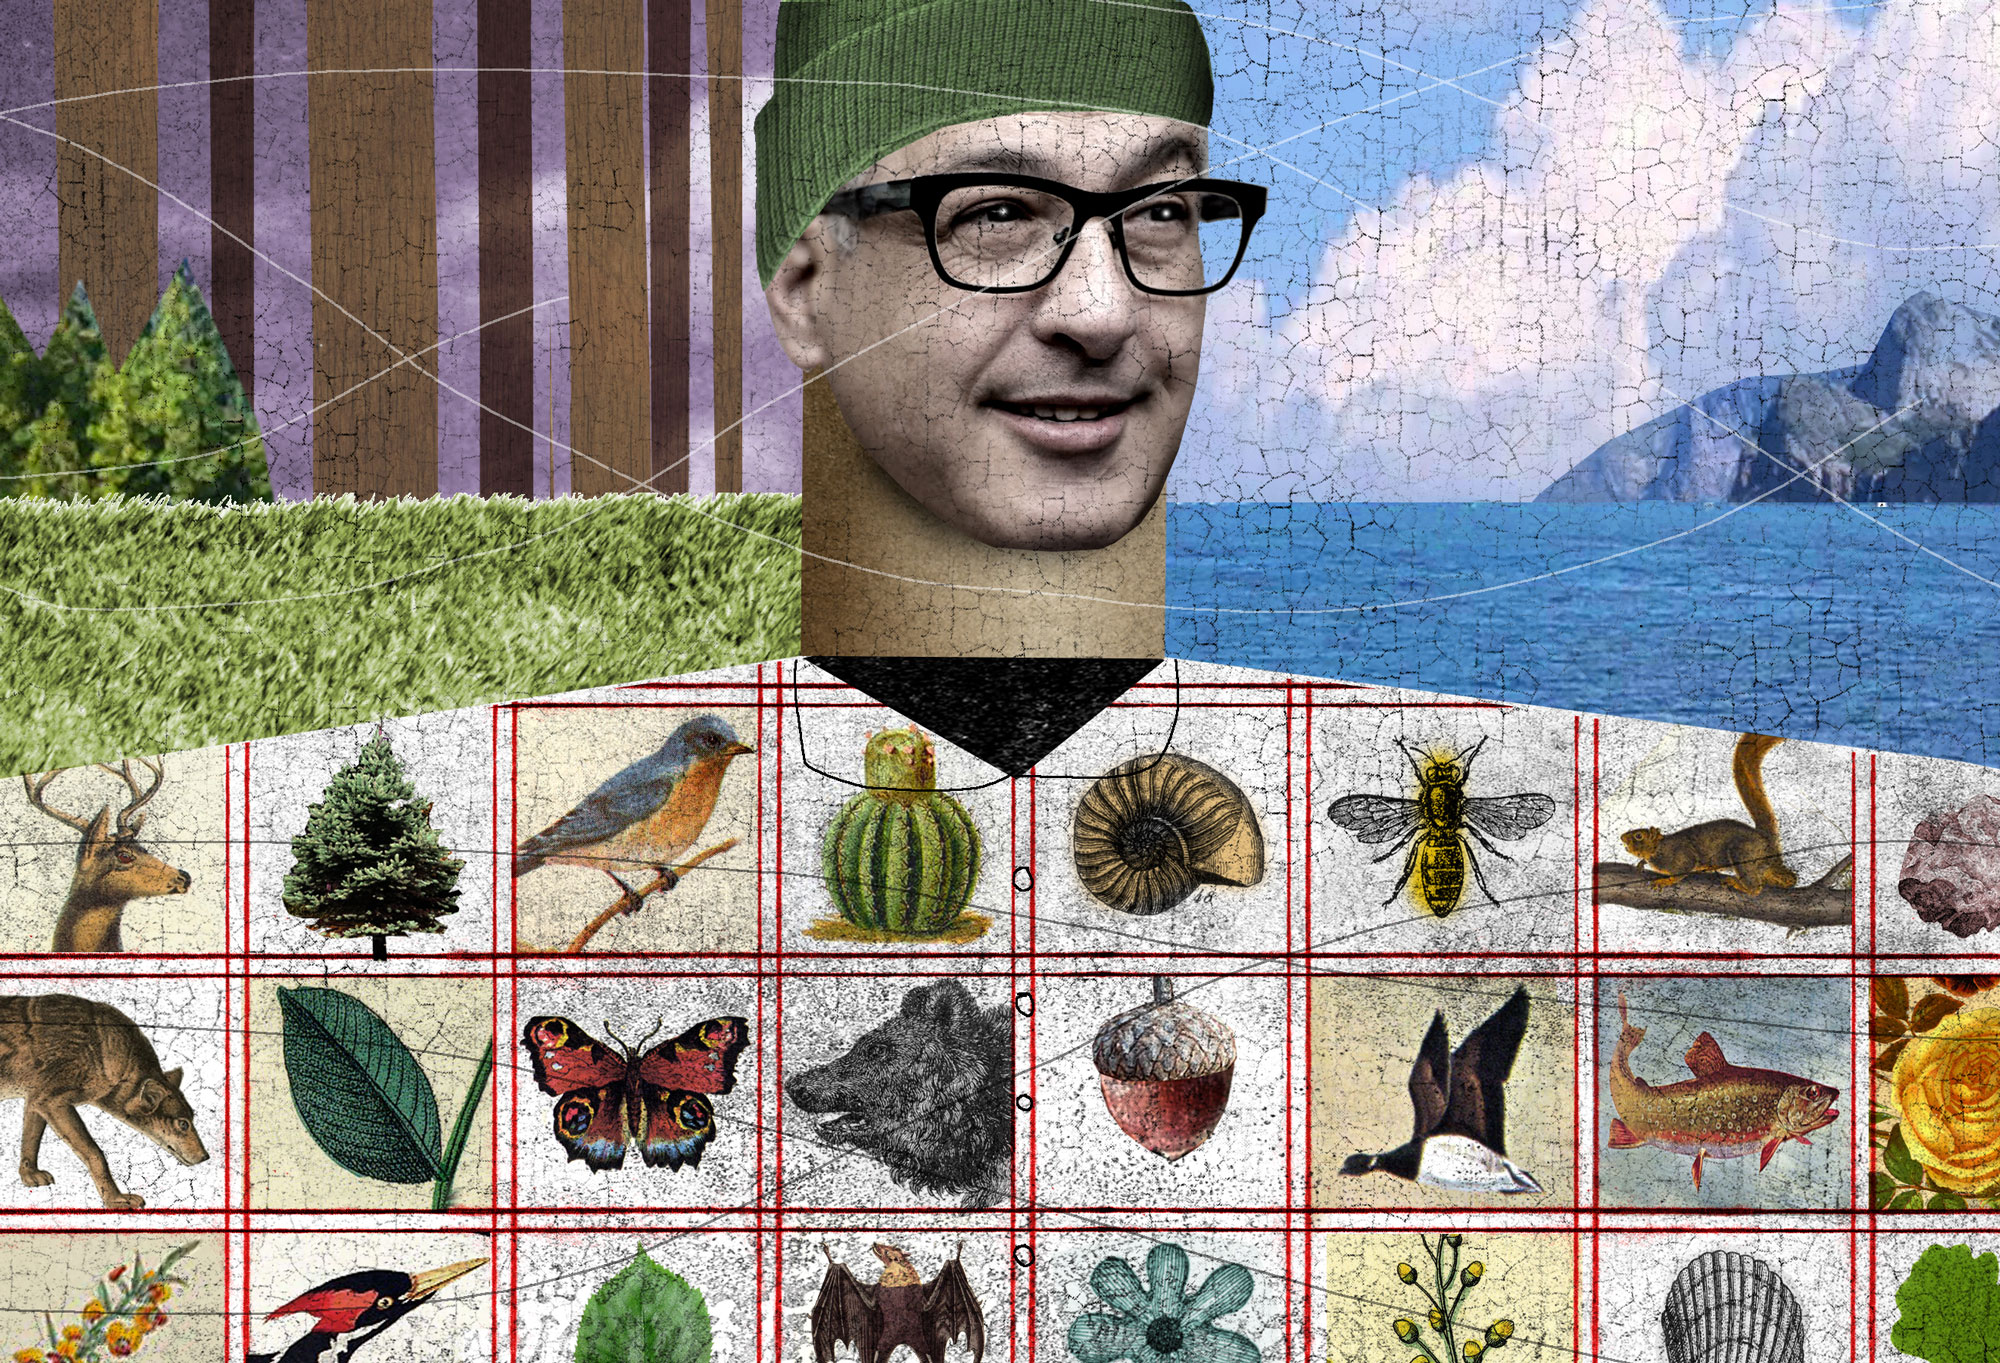 Collage of images featuring David Plunkert smiling, a green grassy field, a seascape, and a grid of animals and plants, including a bear, a goose, a bee and a tree.